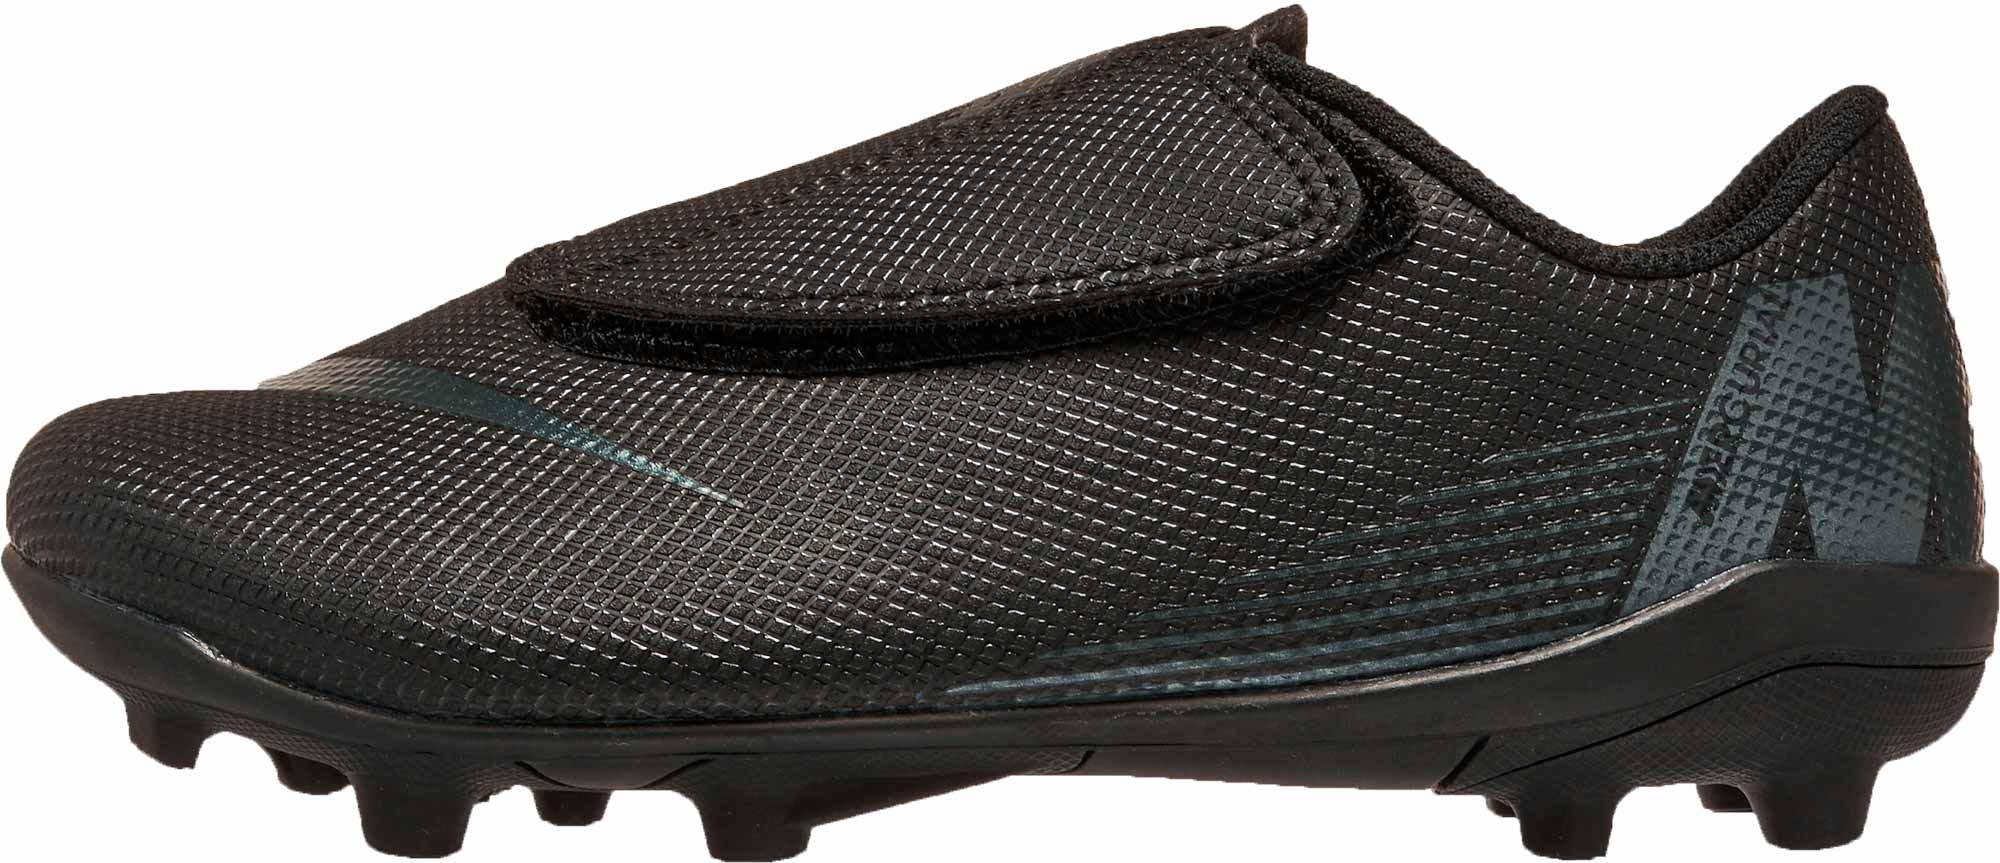 velcro cleats youth